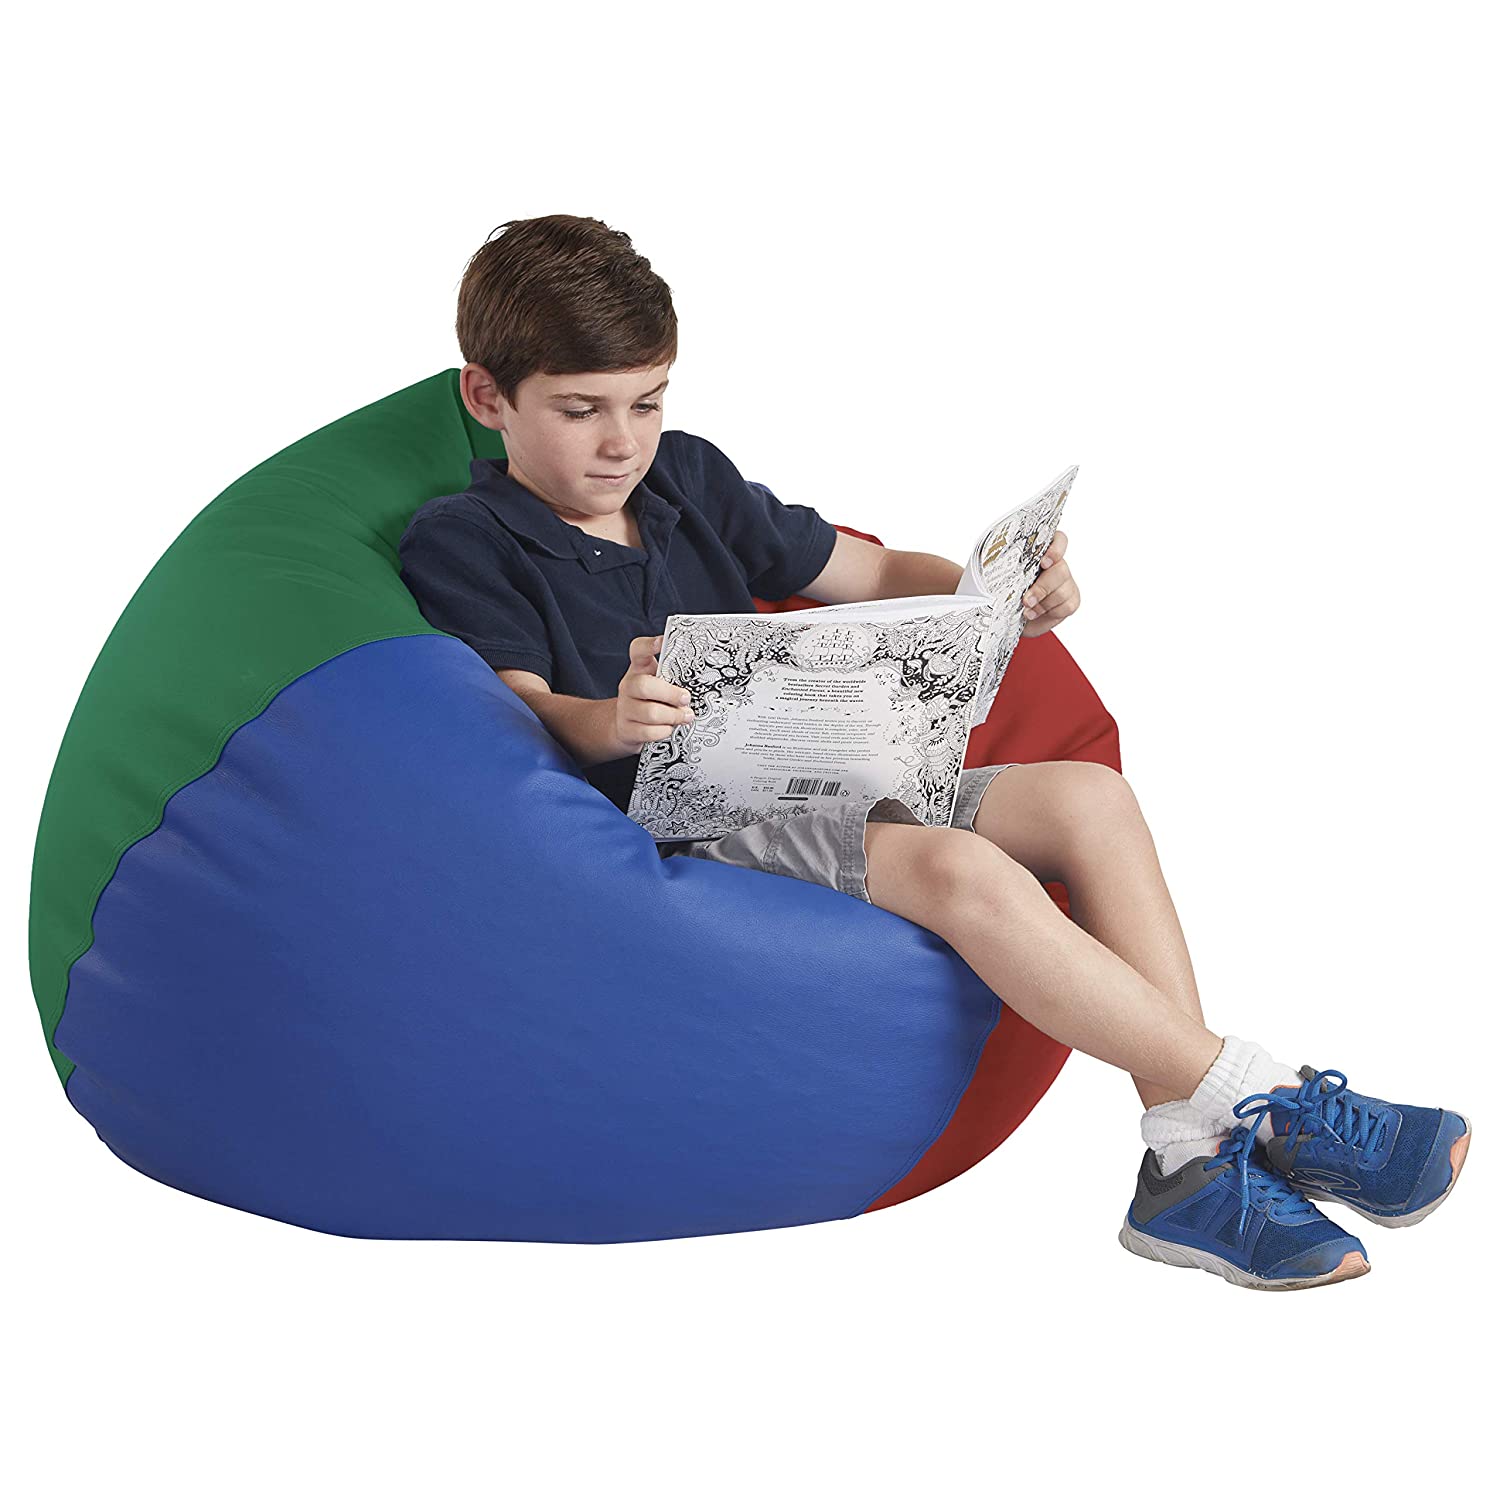 FDP SoftScape Classic 35 inch Junior Bean Bag Chair, Furniture for Kids